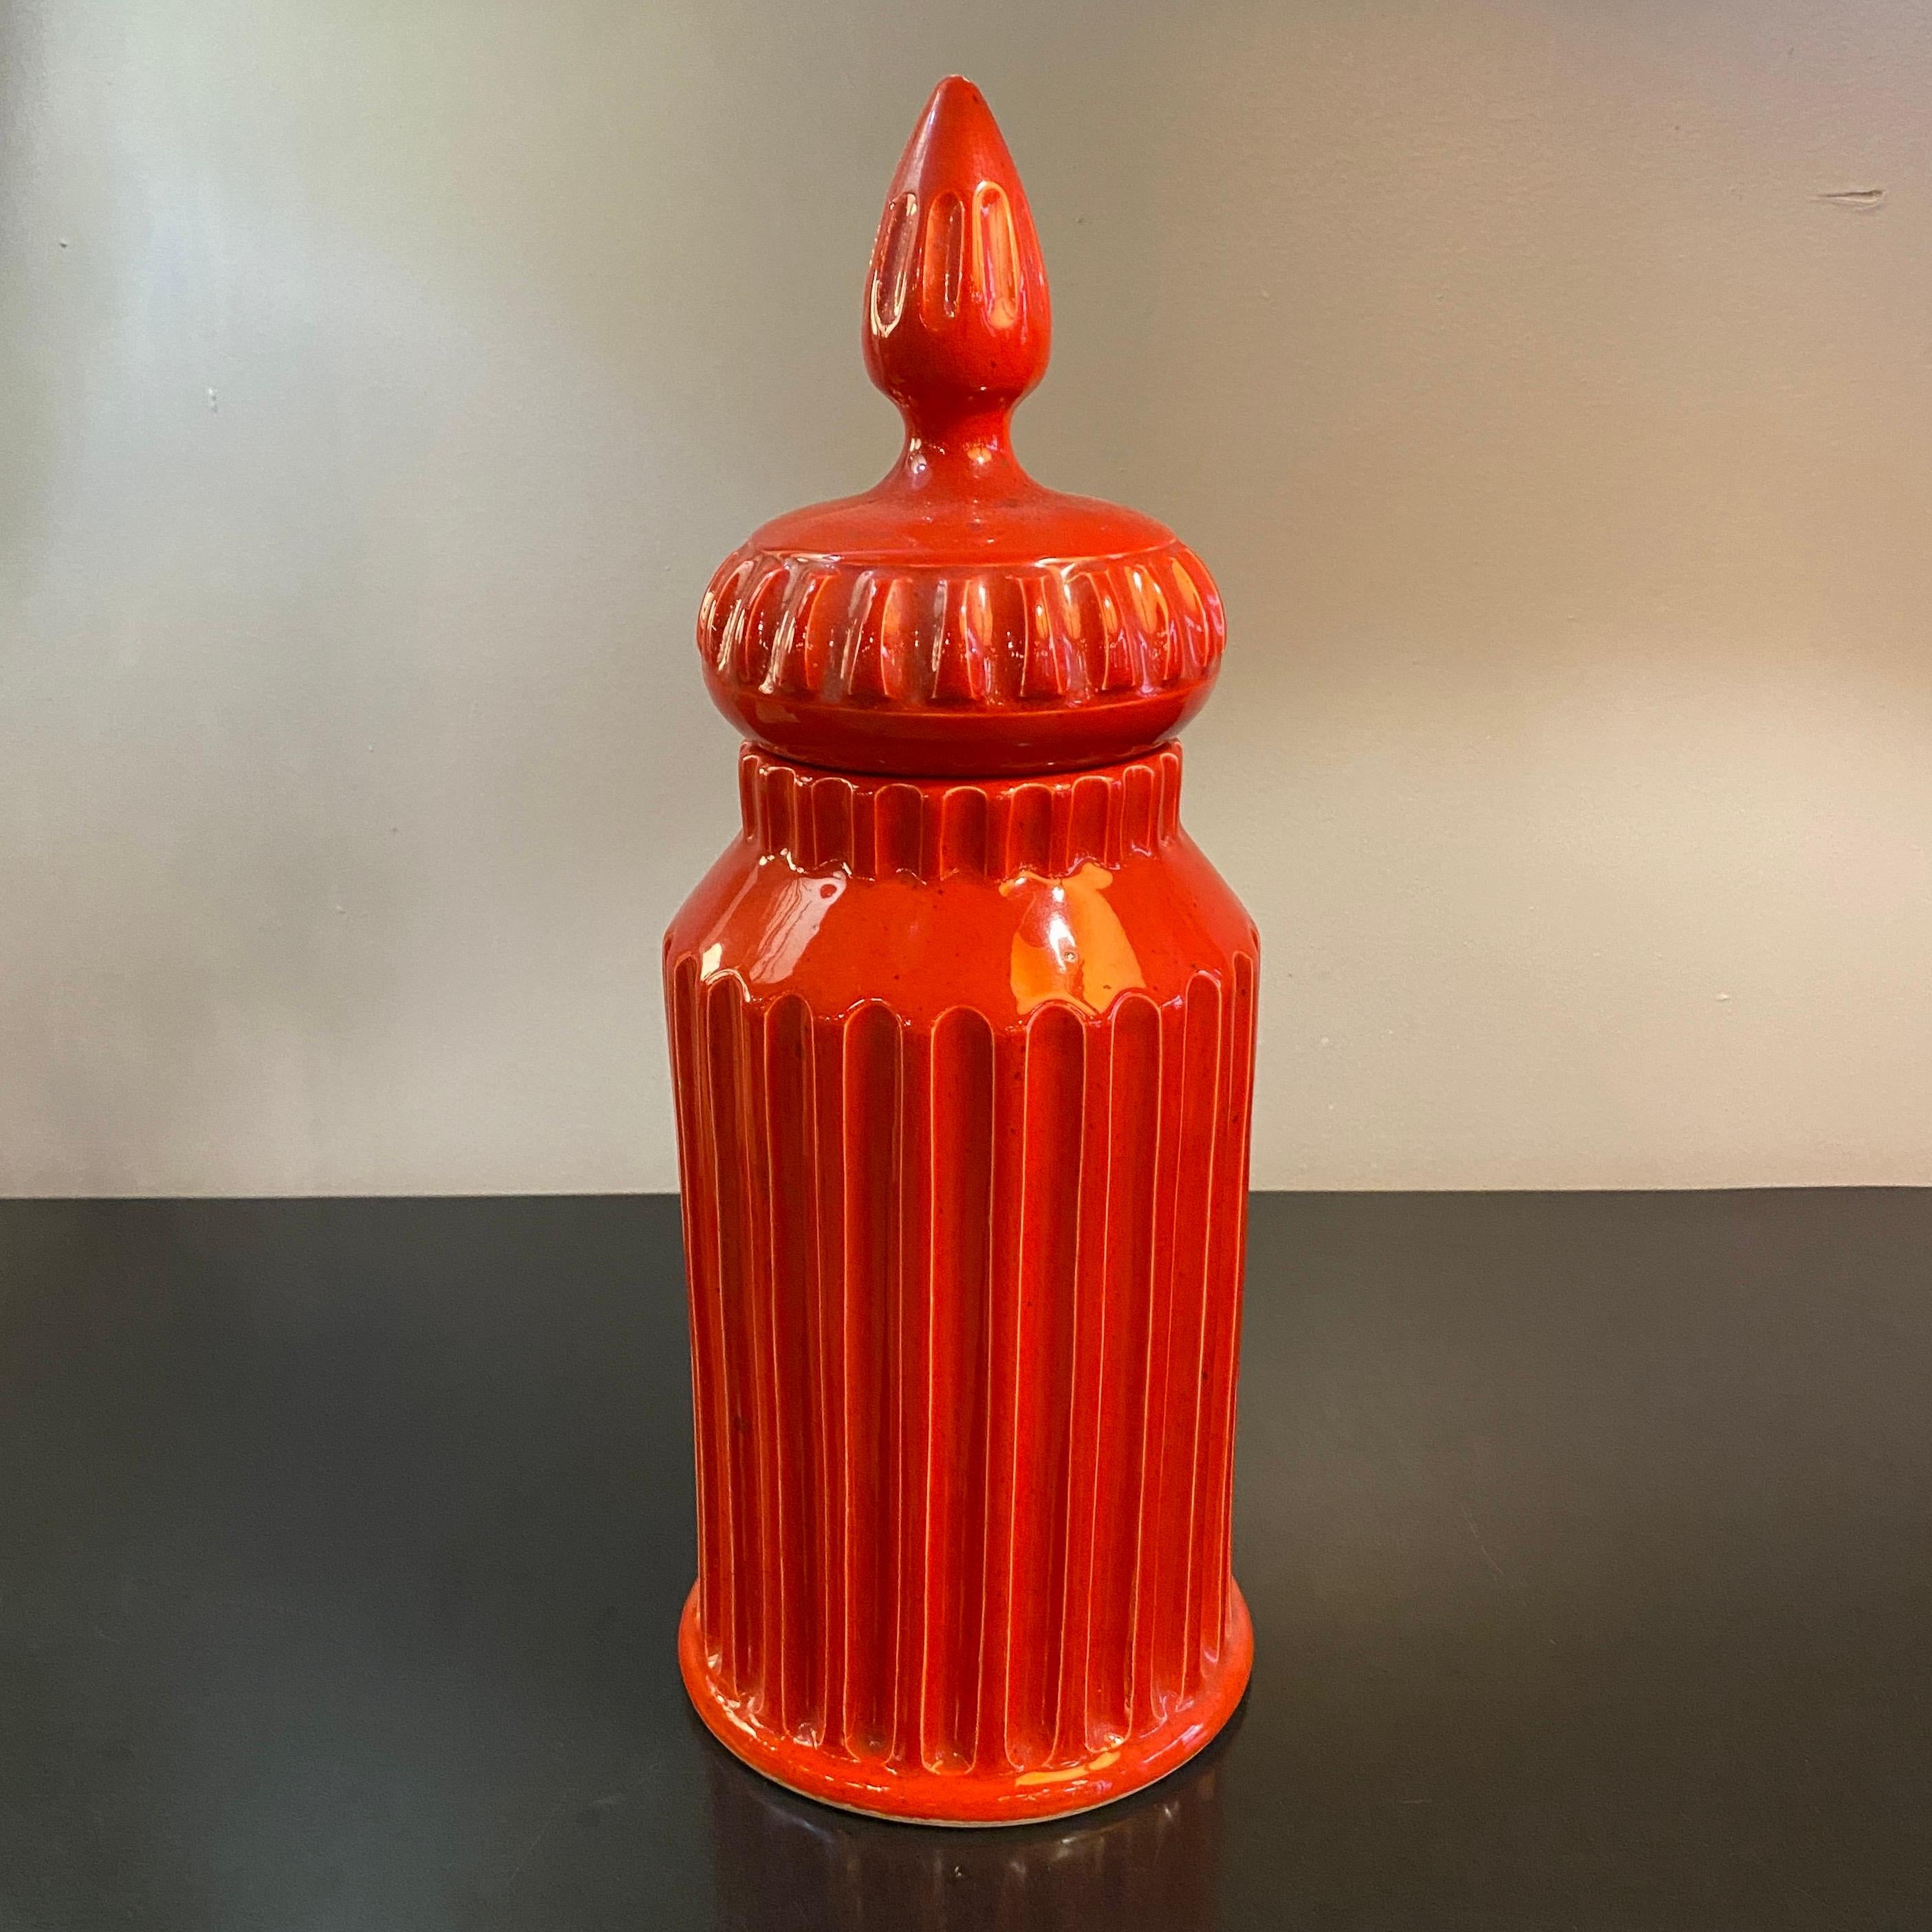 Mid-century, Italian, Moorish art pottery jar with lid in vibrant paprika red-orange. This glazed ceramic piece features a ribbed texture on both the jar and lid. Marked 